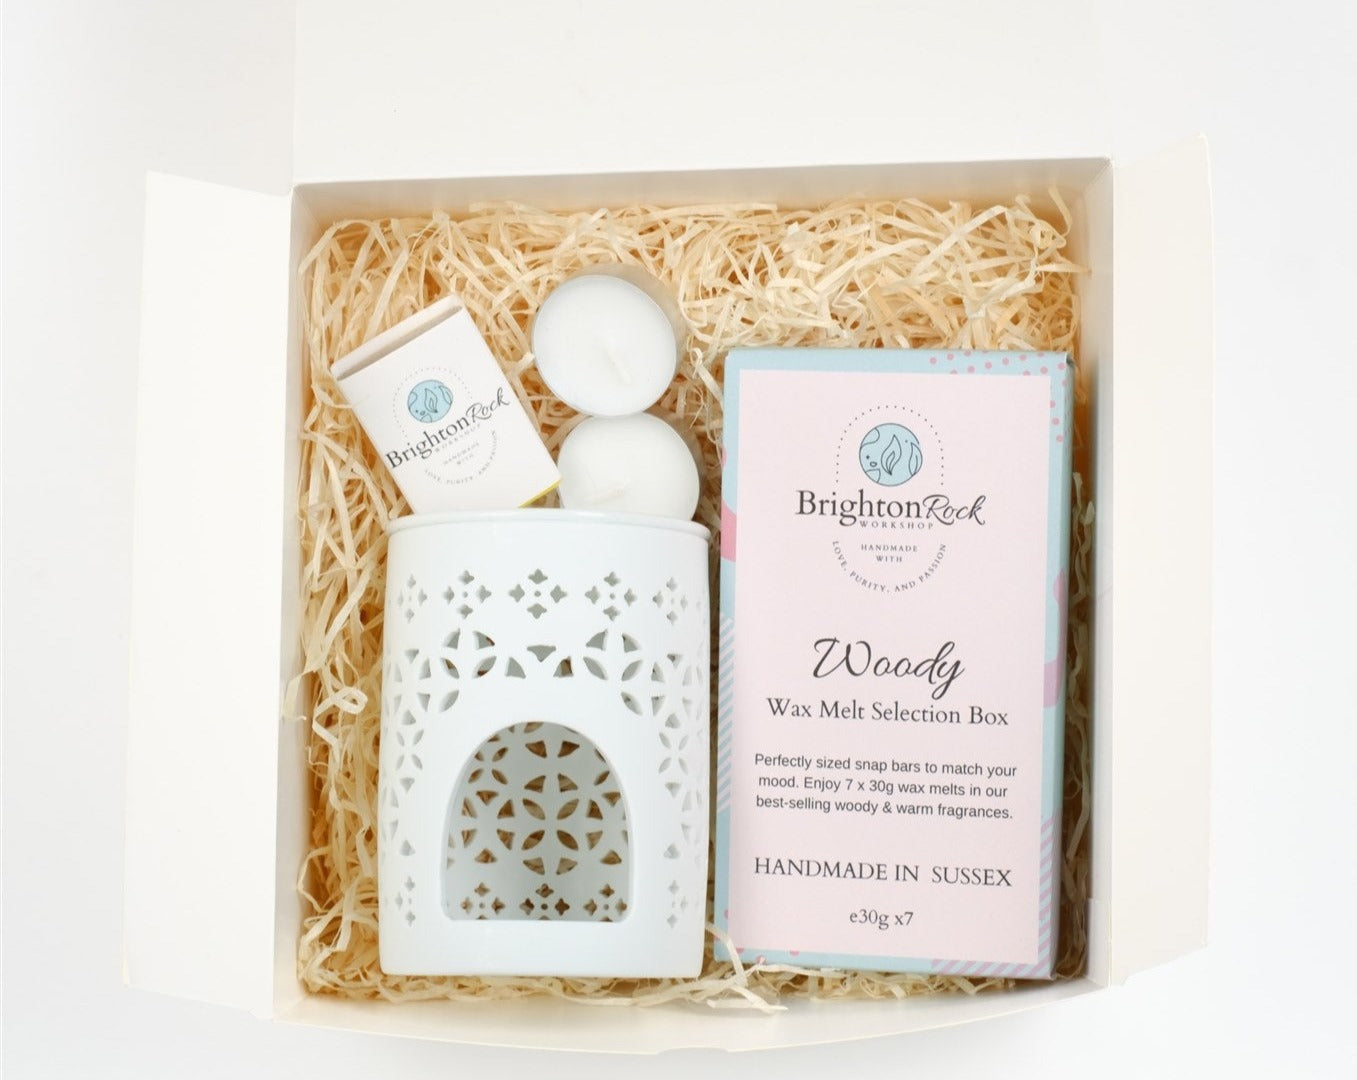 Brighton Rock Workshop wax melt selection box and burner gift set - woody scents and white tea light burner set with matches and candles. vegan and handmade in the UK